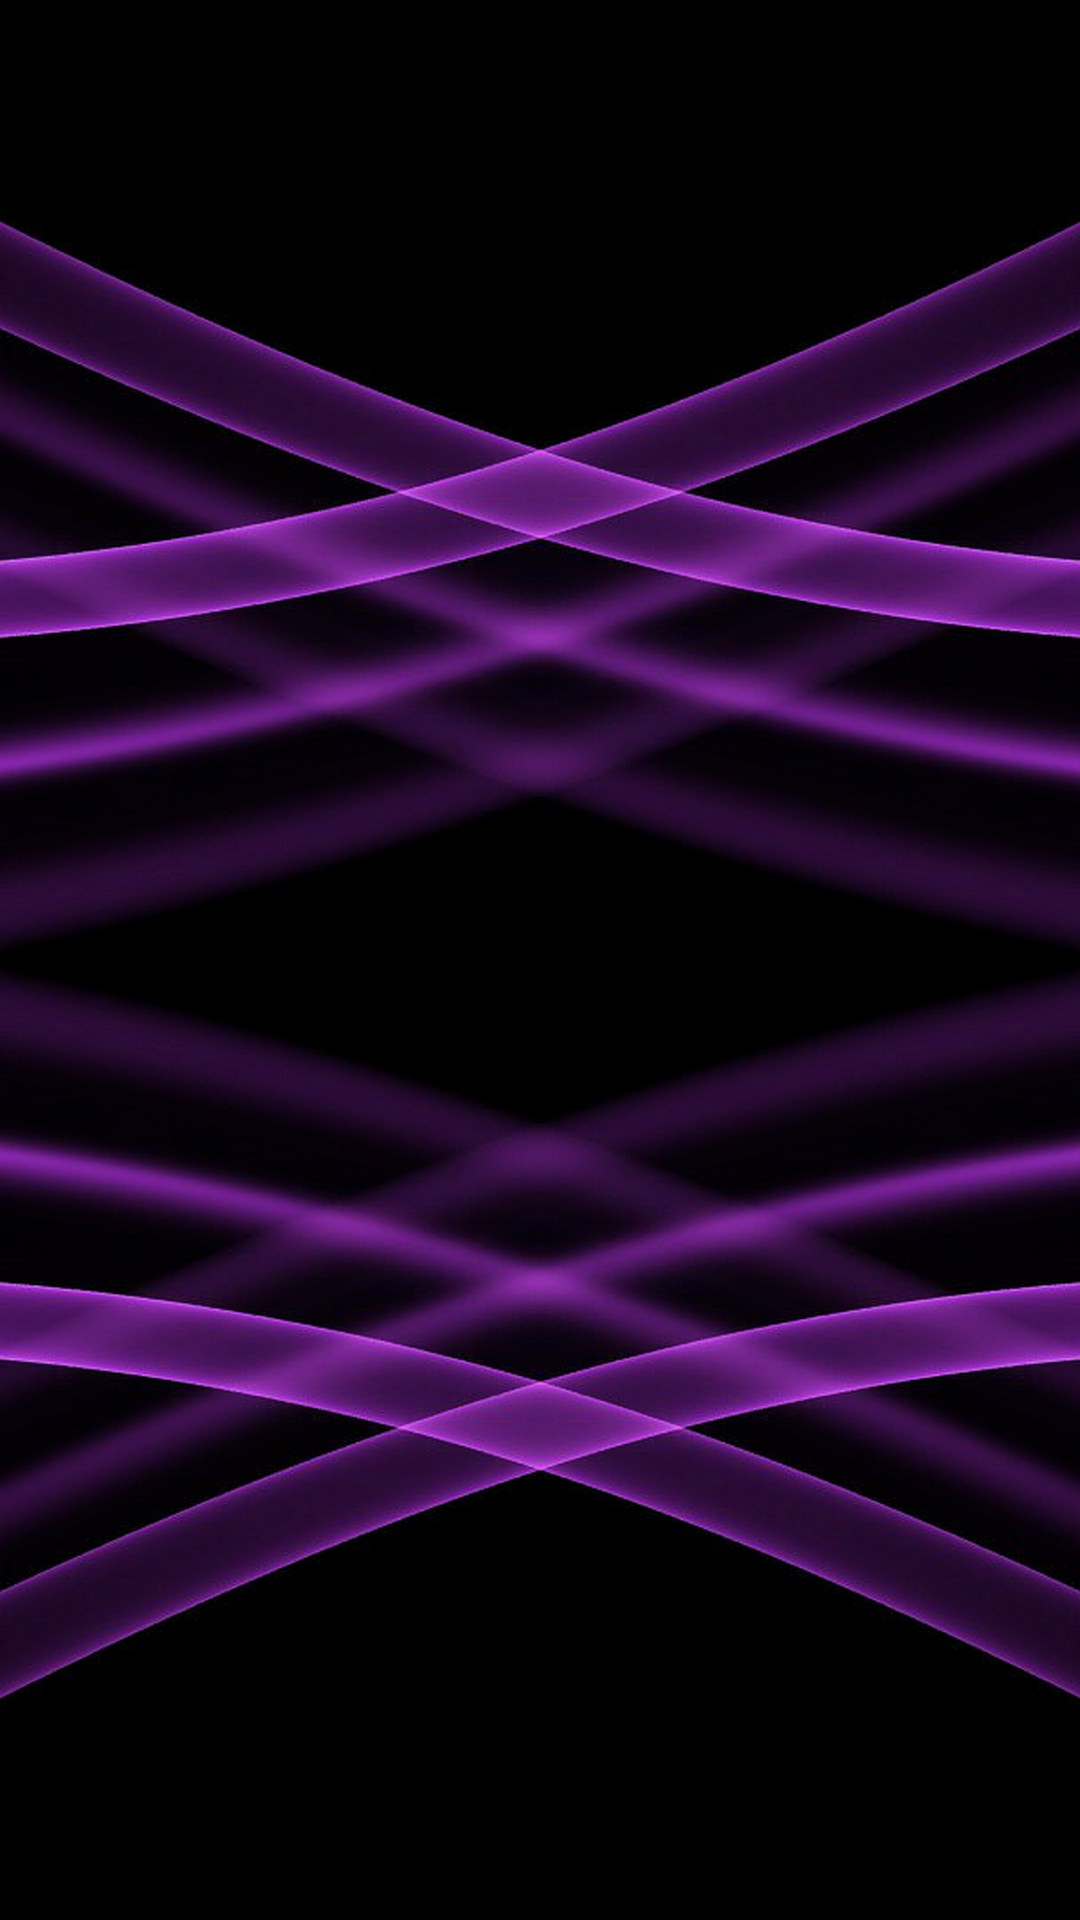 Android Wallpaper HD Cool Purple With high-resolution 1080X1920 pixel. You can use this wallpaper for your Android backgrounds, Tablet, Samsung Screensavers, Mobile Phone Lock Screen and another Smartphones device